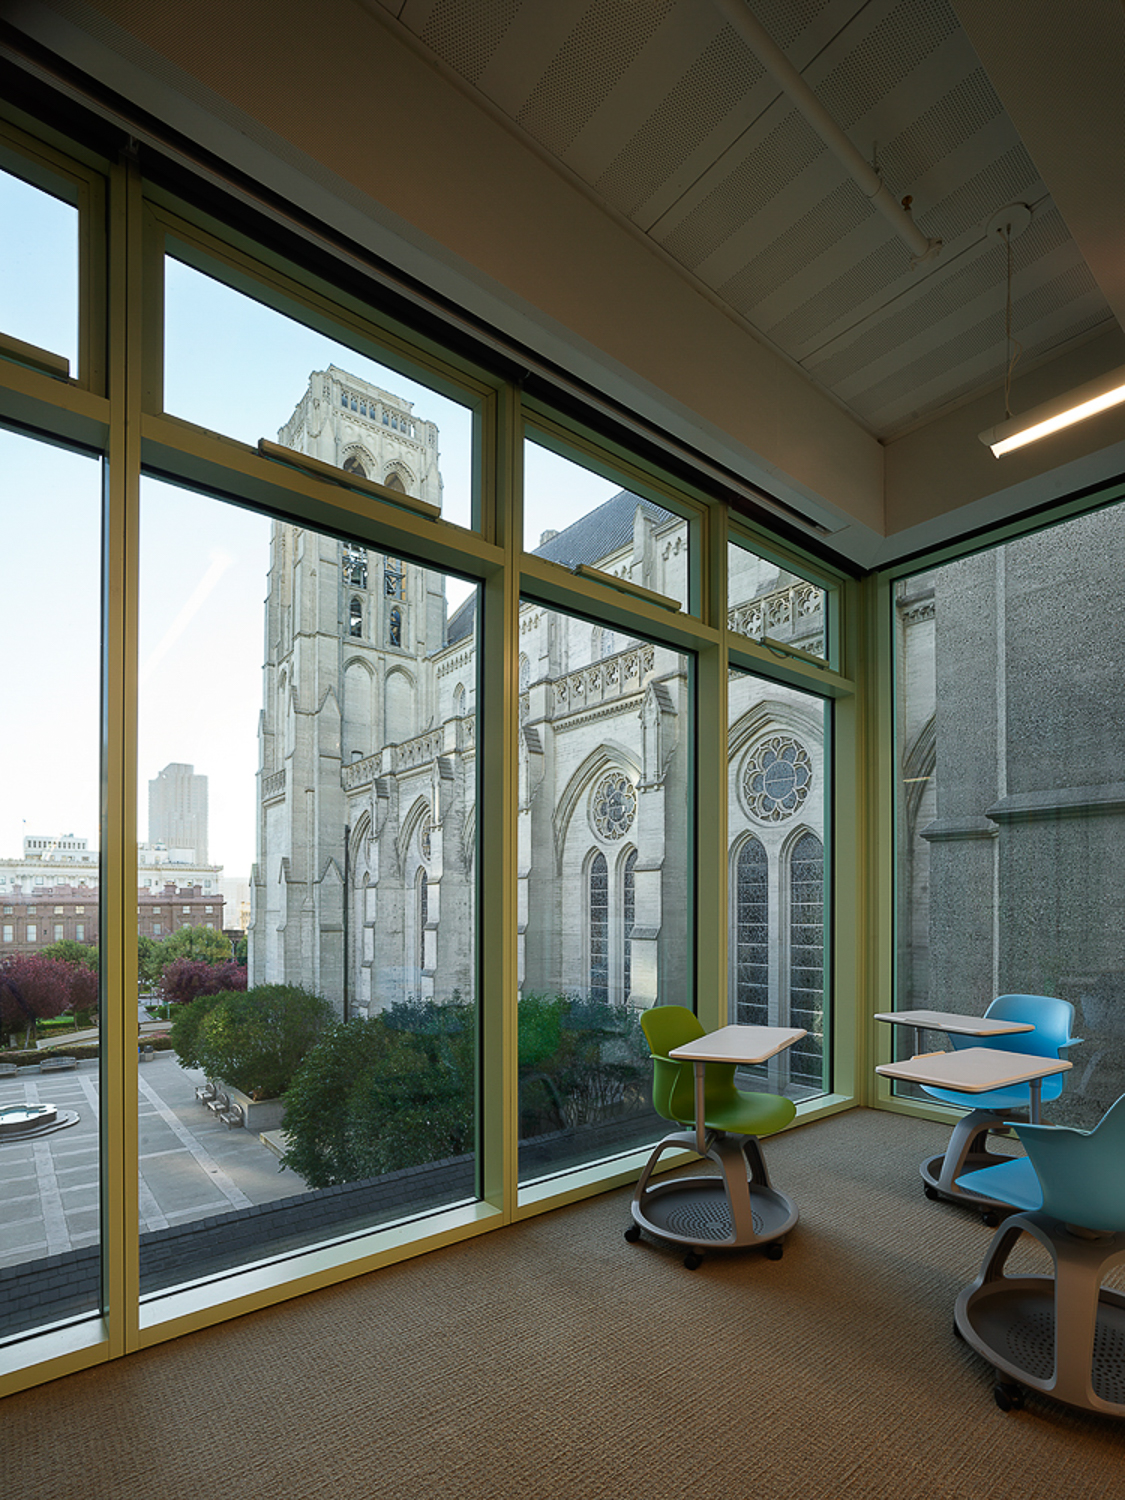 Cathedral School interior looking towards Grace Cathedral, photograph by Matthew Millman courtesy Bloszies Offices